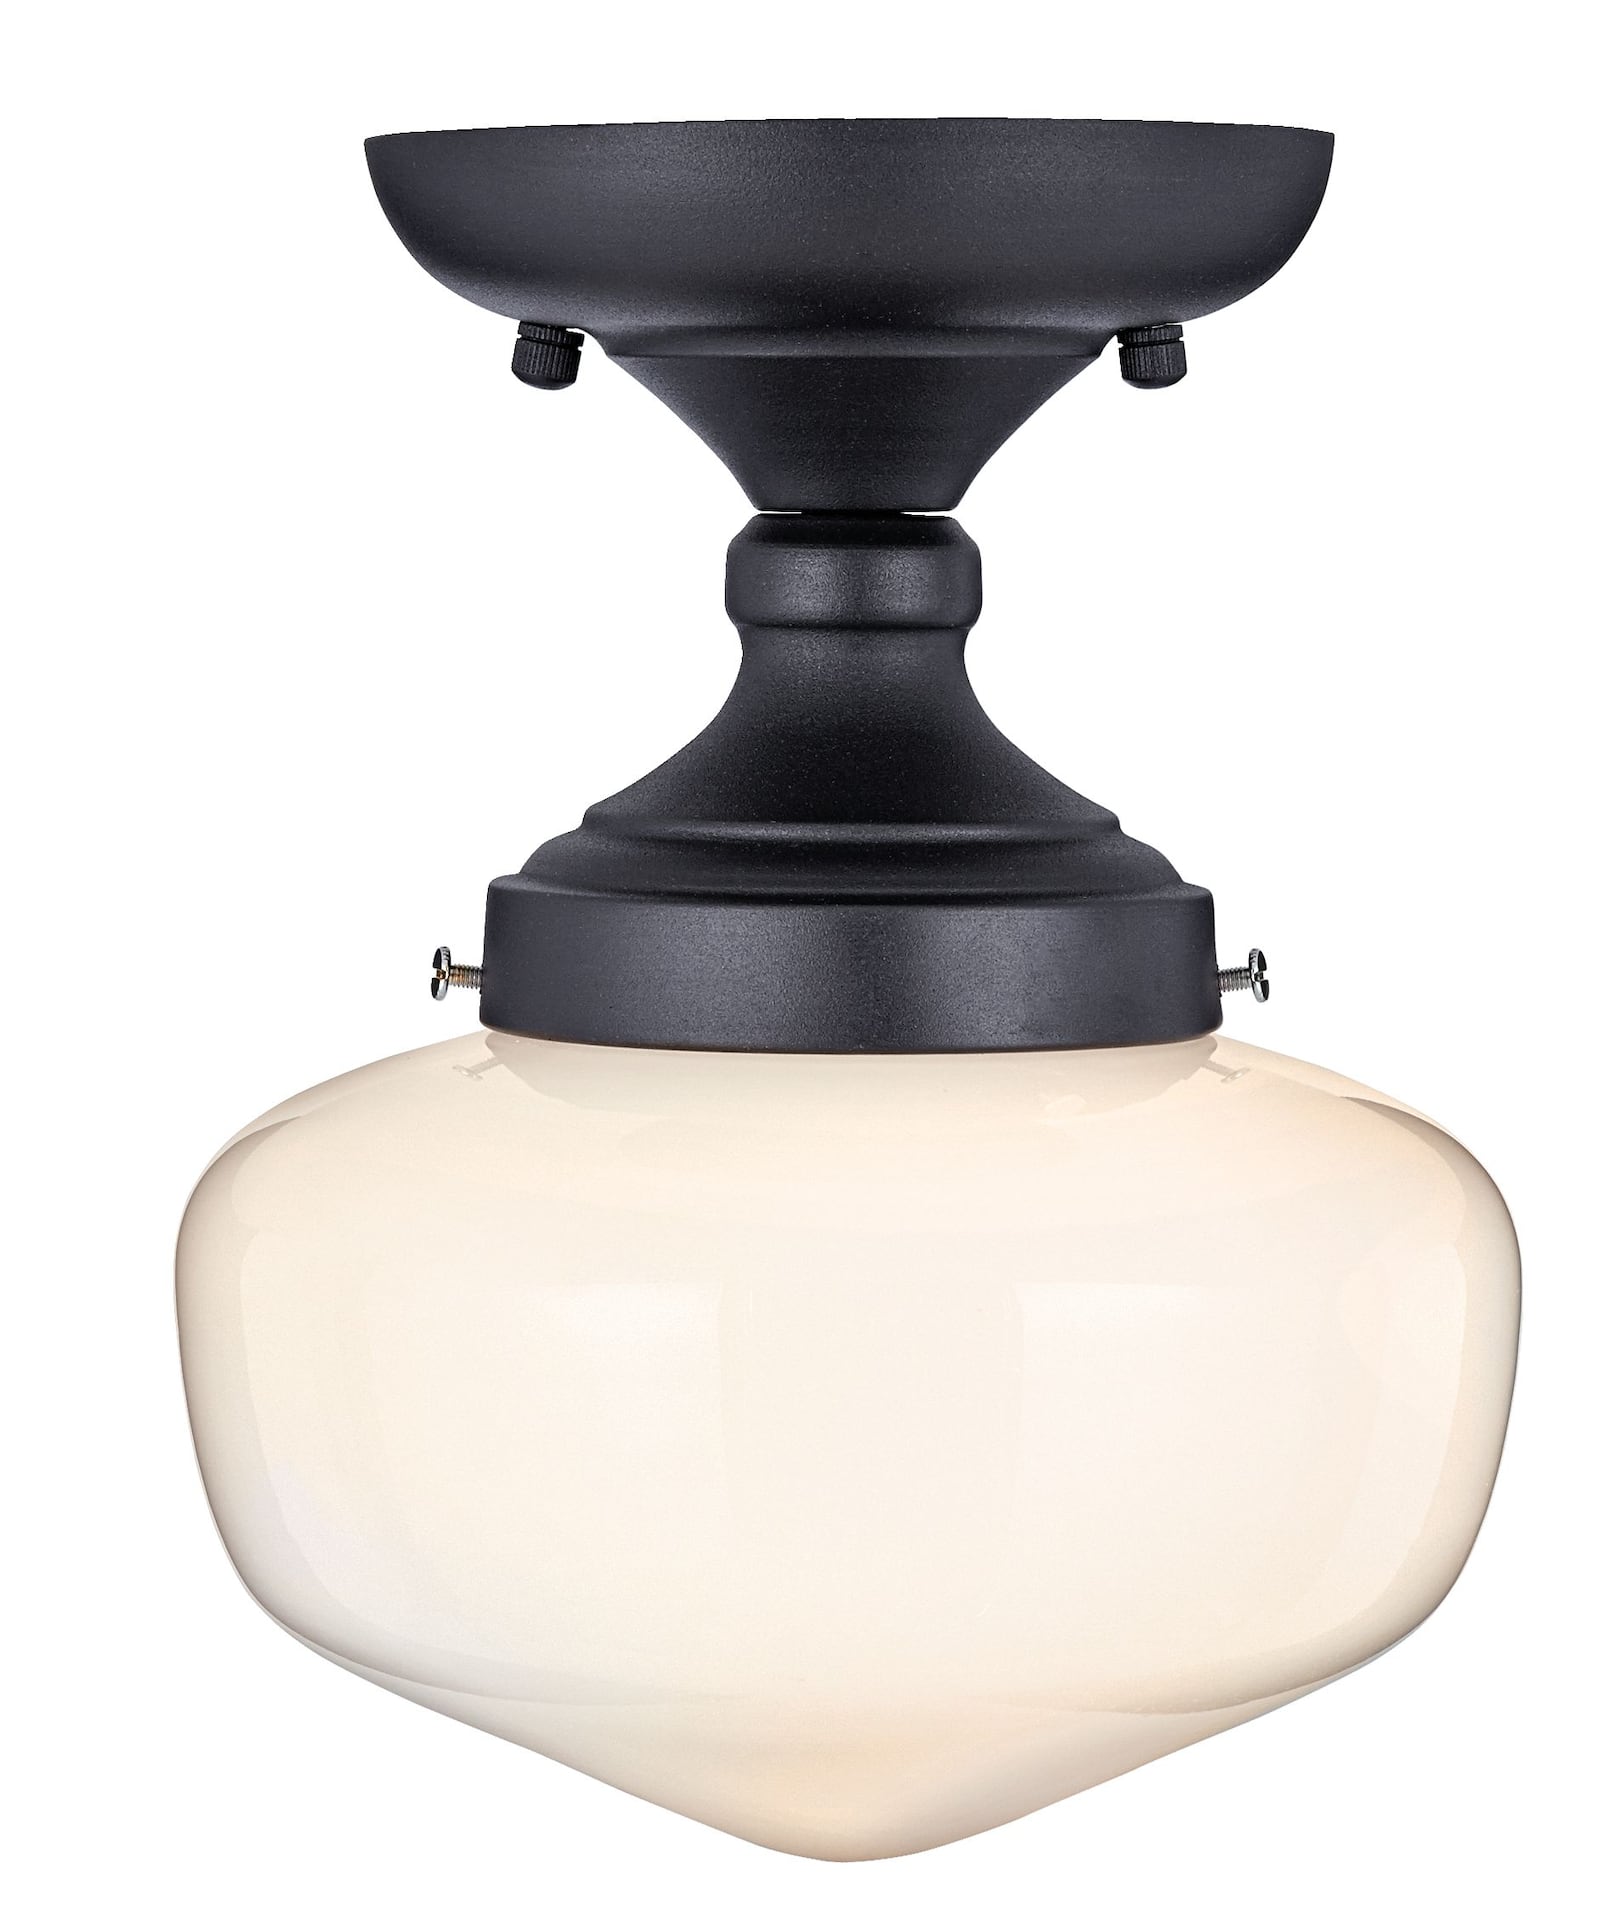 CANVAS Olive Frosted Glass Shade Flush Mount Ceiling Light Fixture